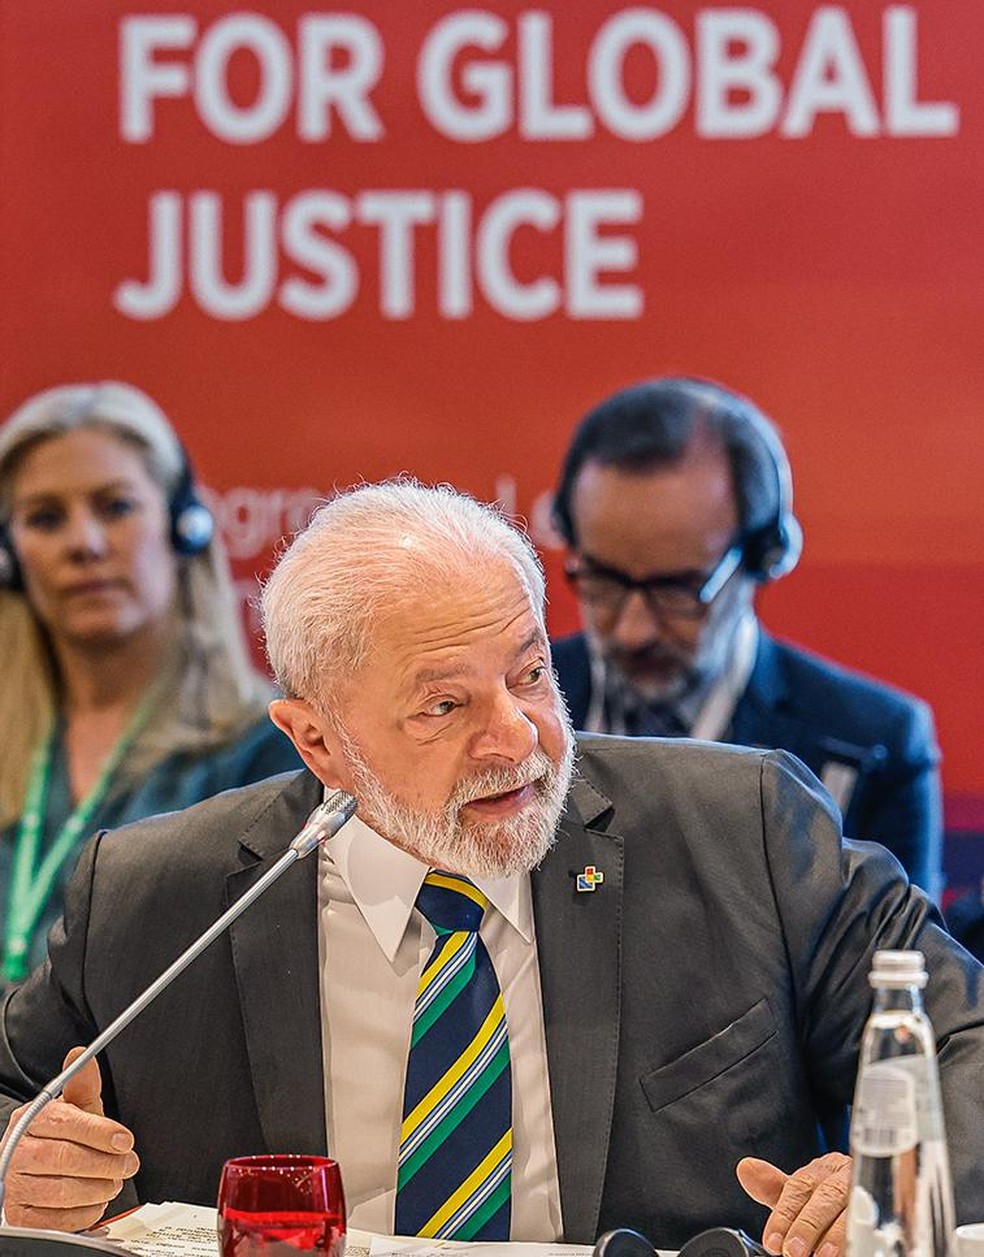 Lula says rich nations' promises are 'lip service that feeds